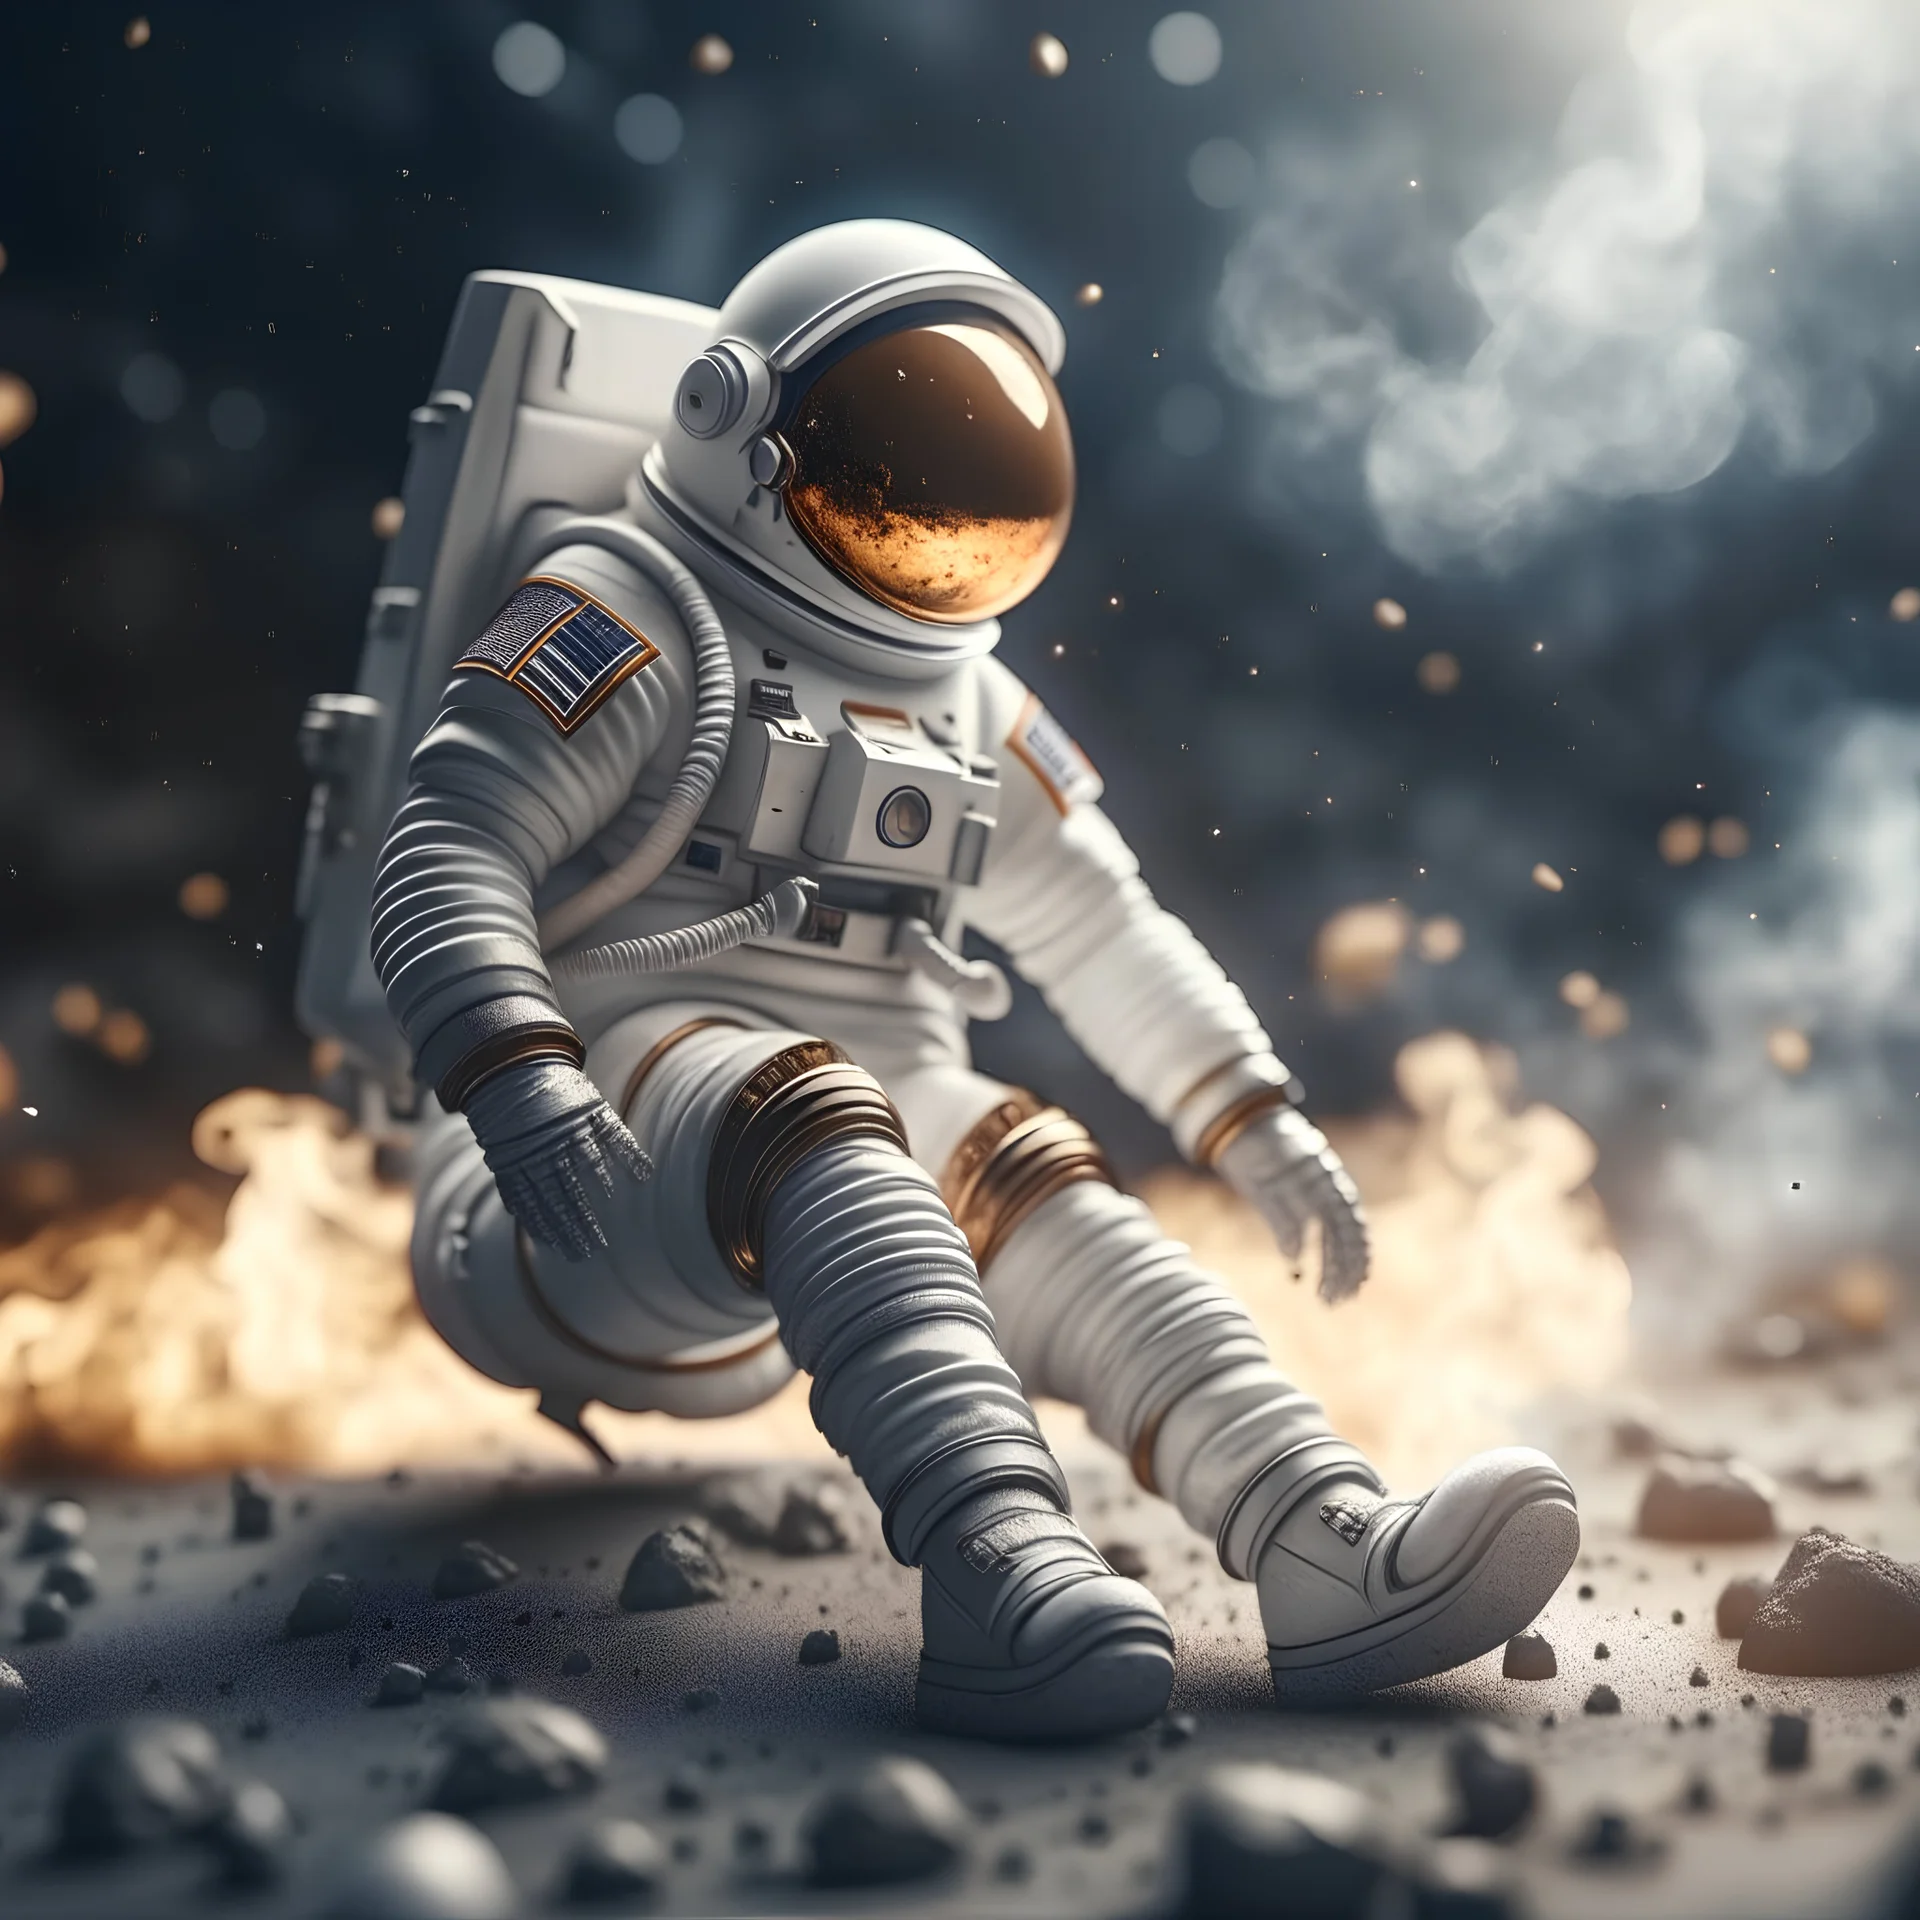 astronaut with burning feet and a moon helmet gets epilepsy and starts to foam like a rock star portrait, photo-realistic, shot on Hasselblad h6d-400c, zeiss prime lens, bokeh like f/0.8, tilt-shift lens 8k, high detail, smooth render, down-light, unreal engine 5, cinema 4d, HDR, dust effect,, smoke